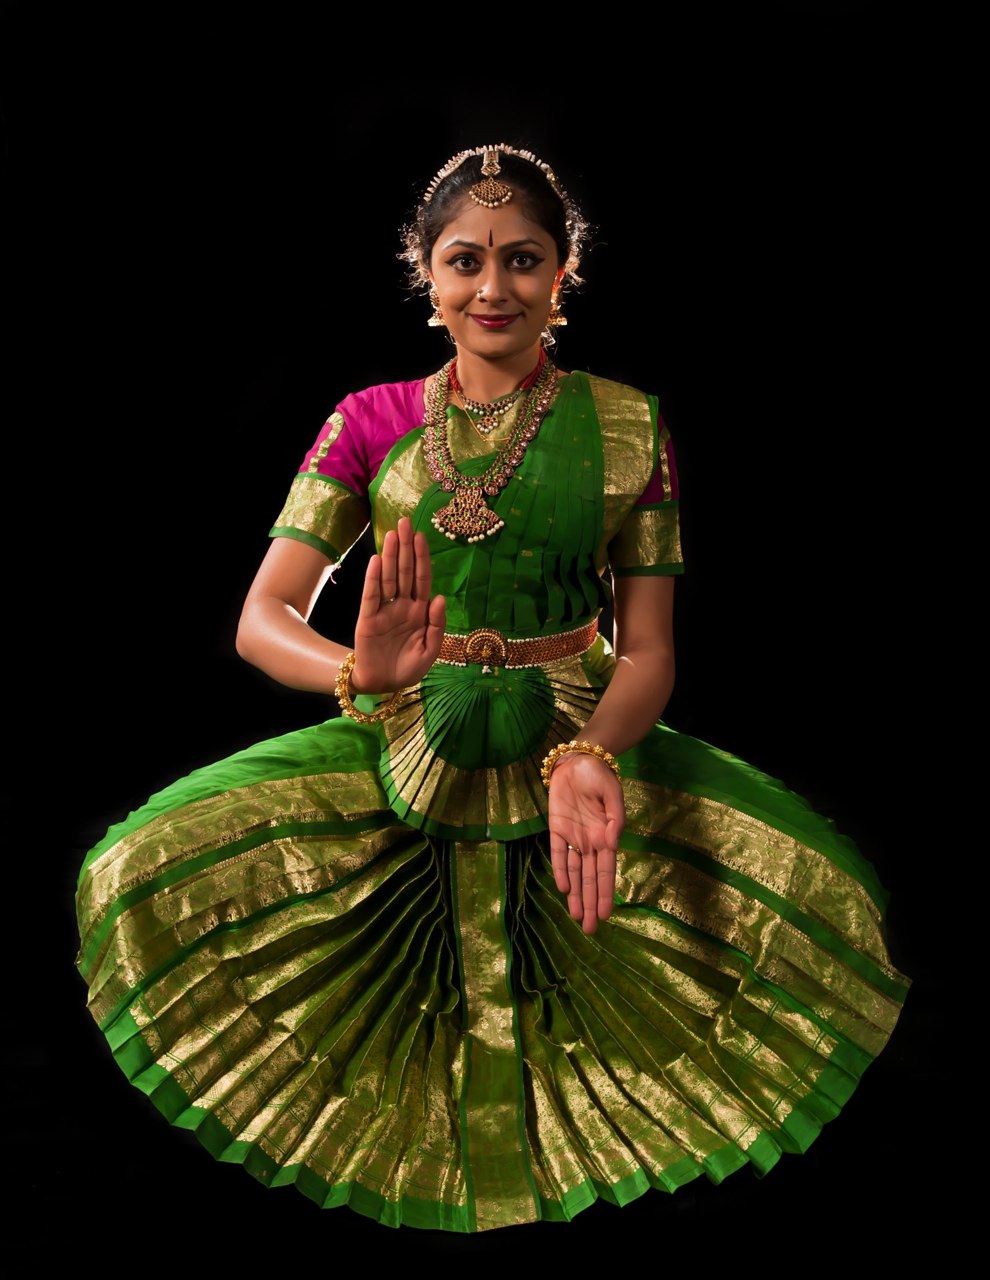 Indian dancer One hand pointed up, one down Wears a green costume